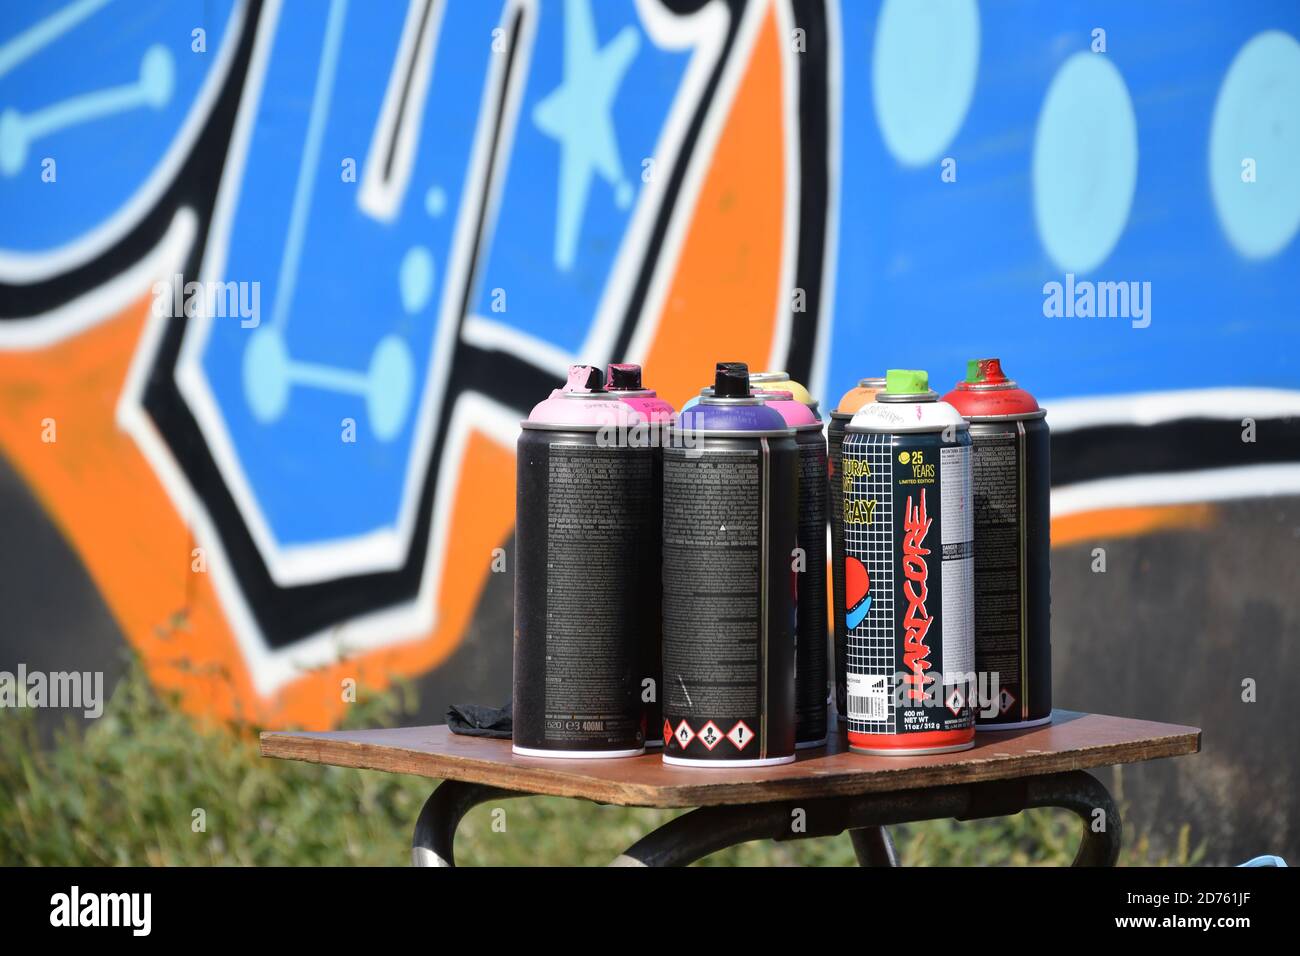 Used cans of spray paint in a bag Stock Photo - Alamy